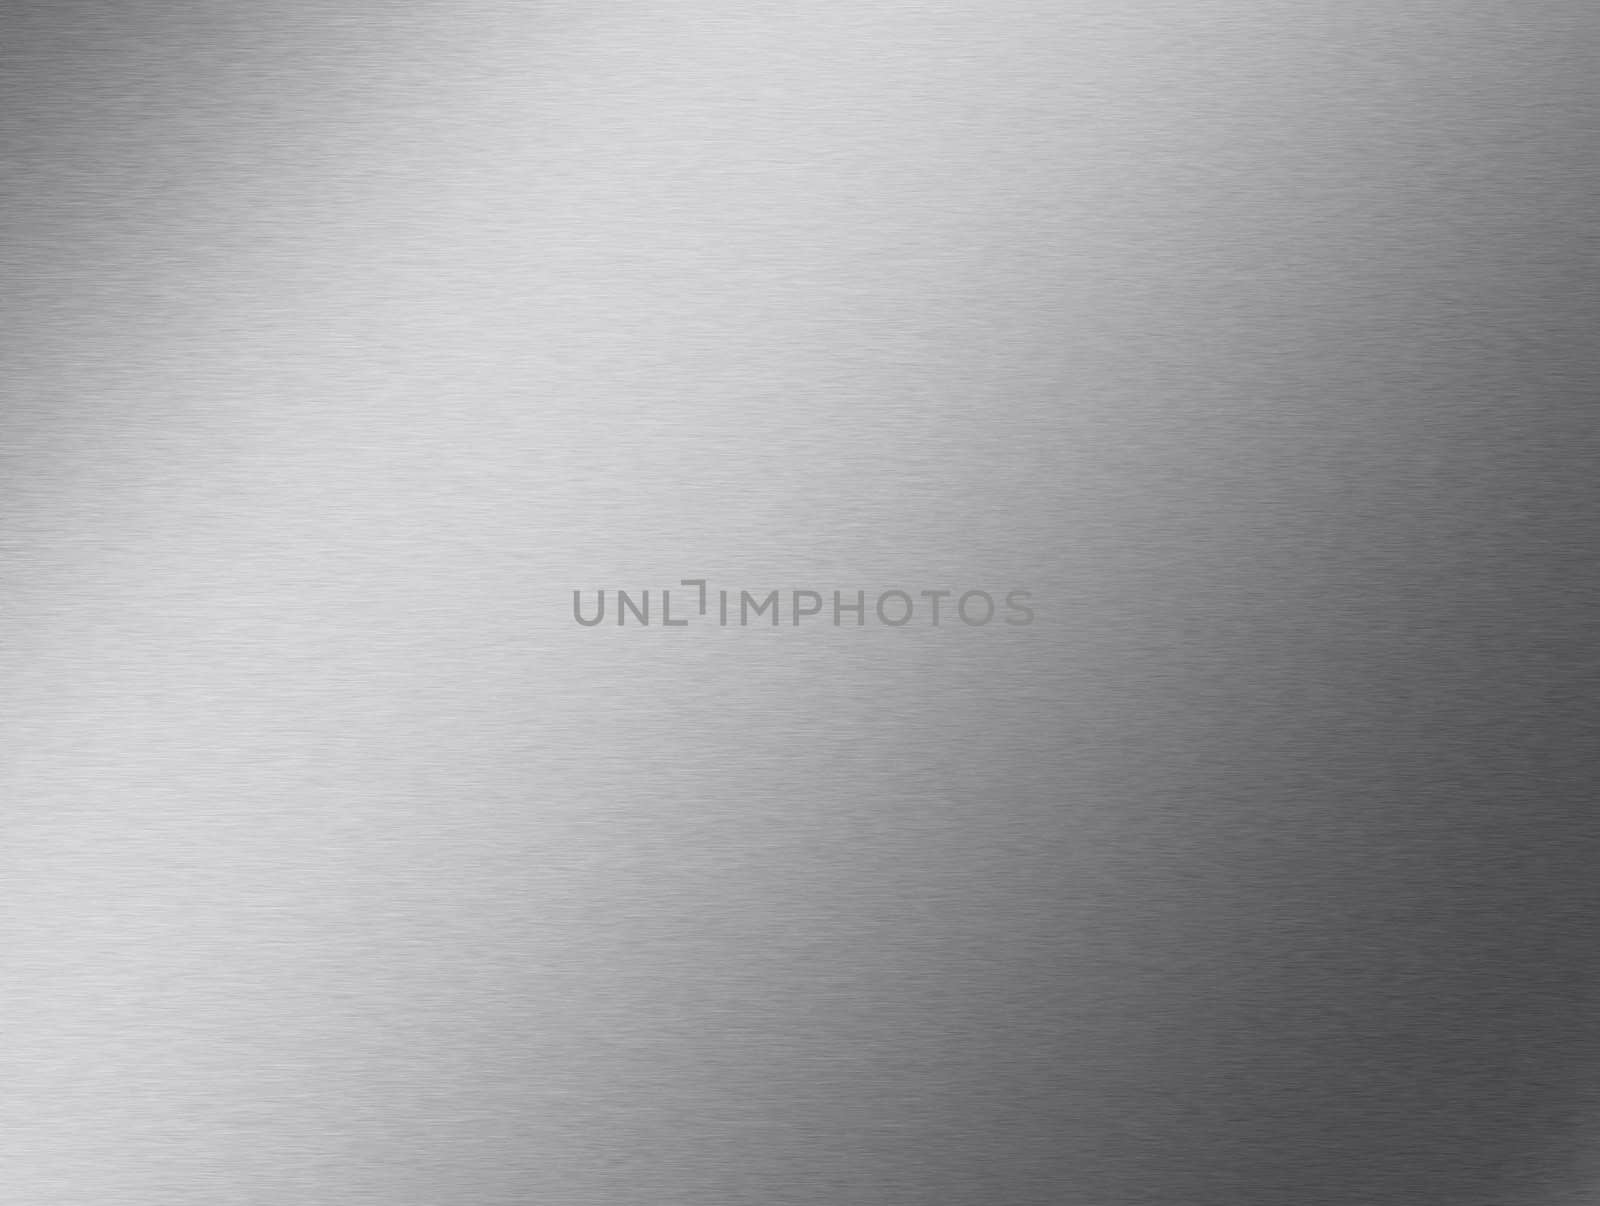 Image of a grey brushed metal texture.